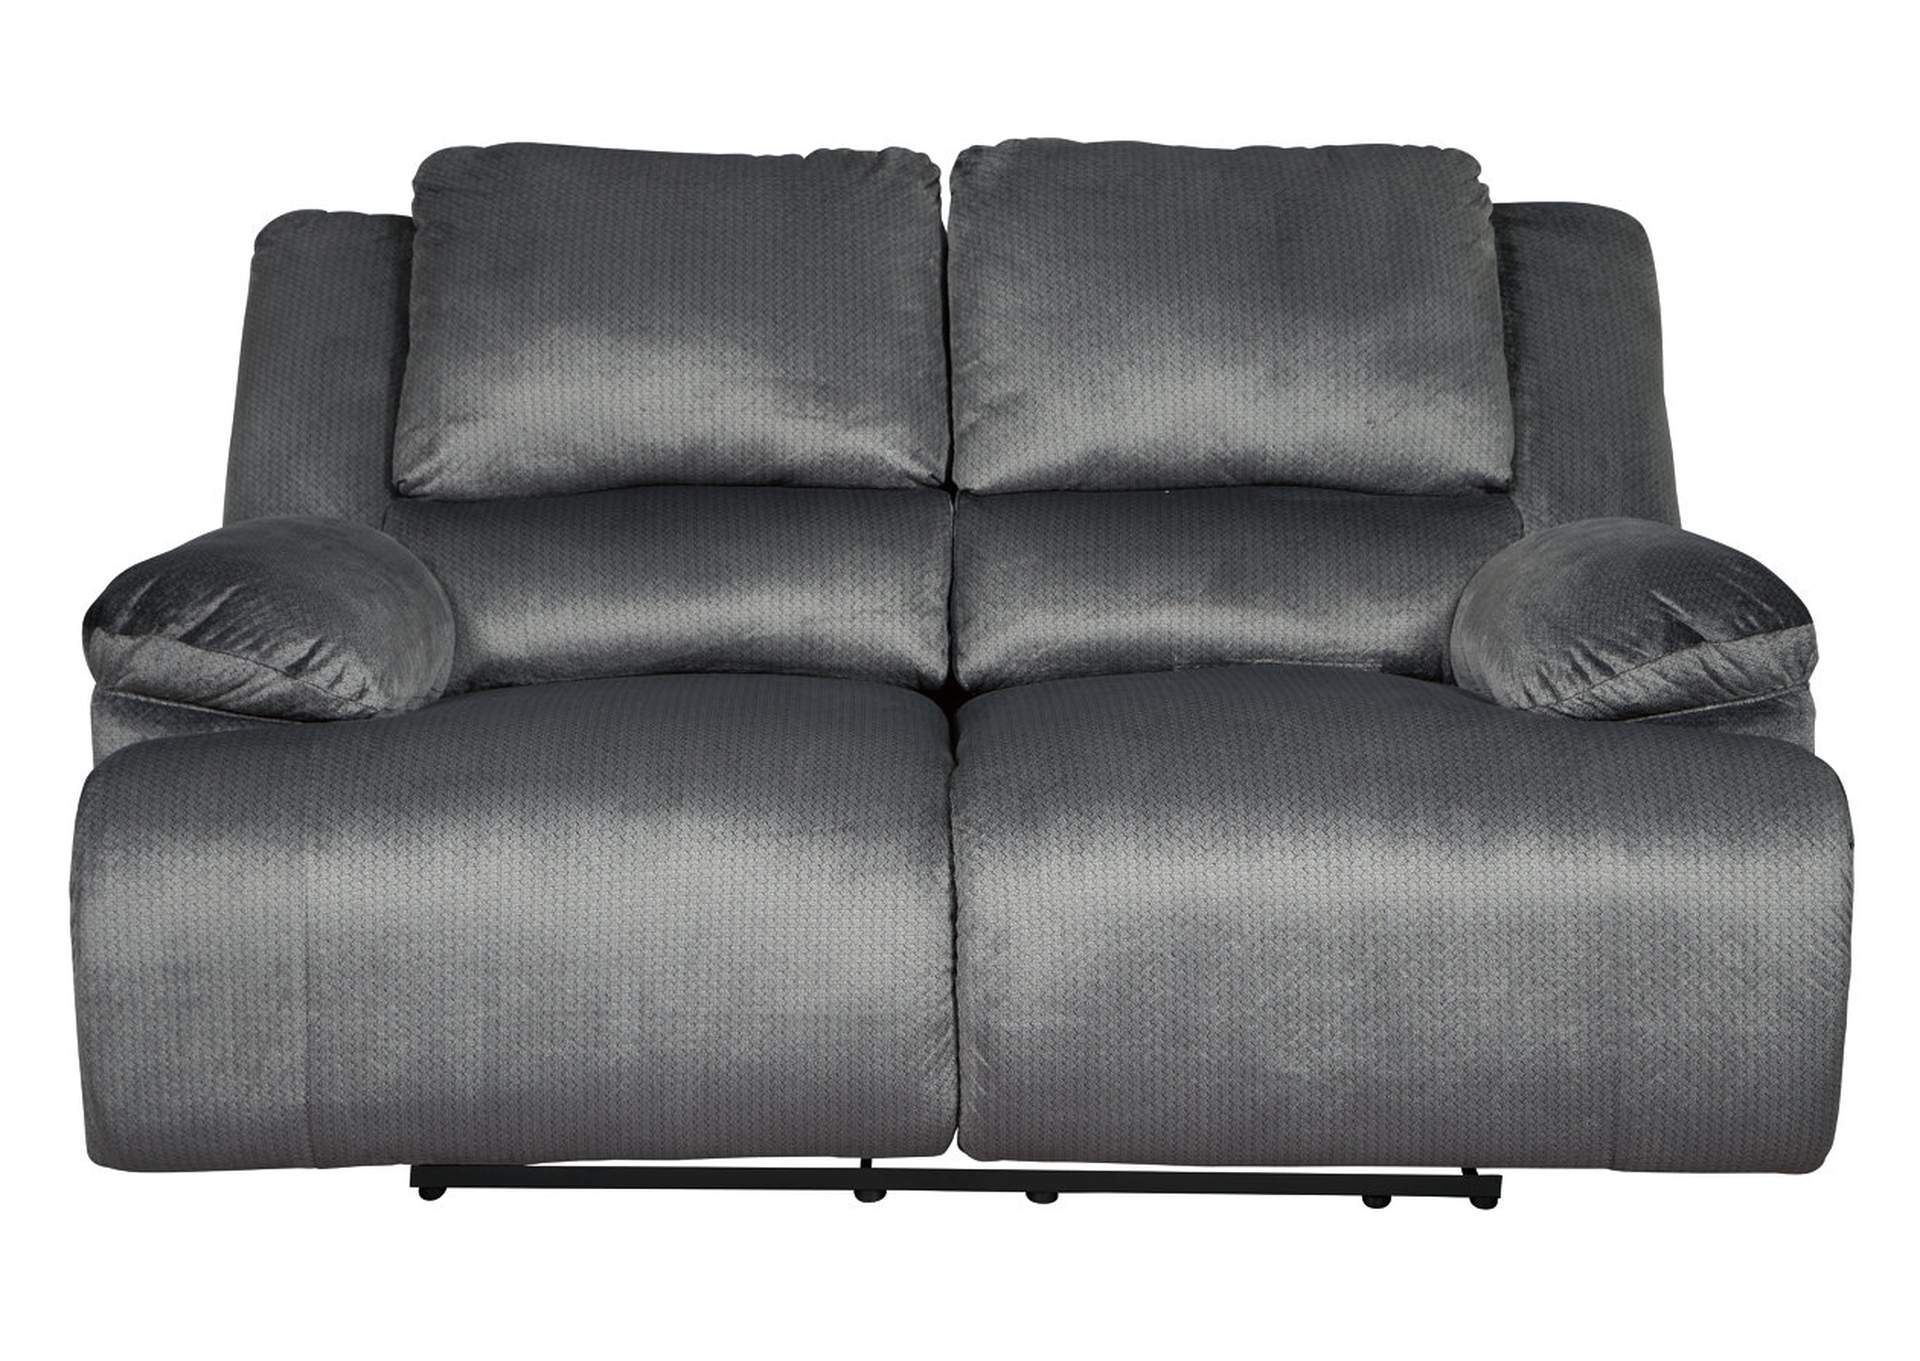 Clonmel Reclining Loveseat Furniture Town Tx Regarding Trendy Round Beige Faux Leather Ottomans With Pull Tab (View 10 of 10)